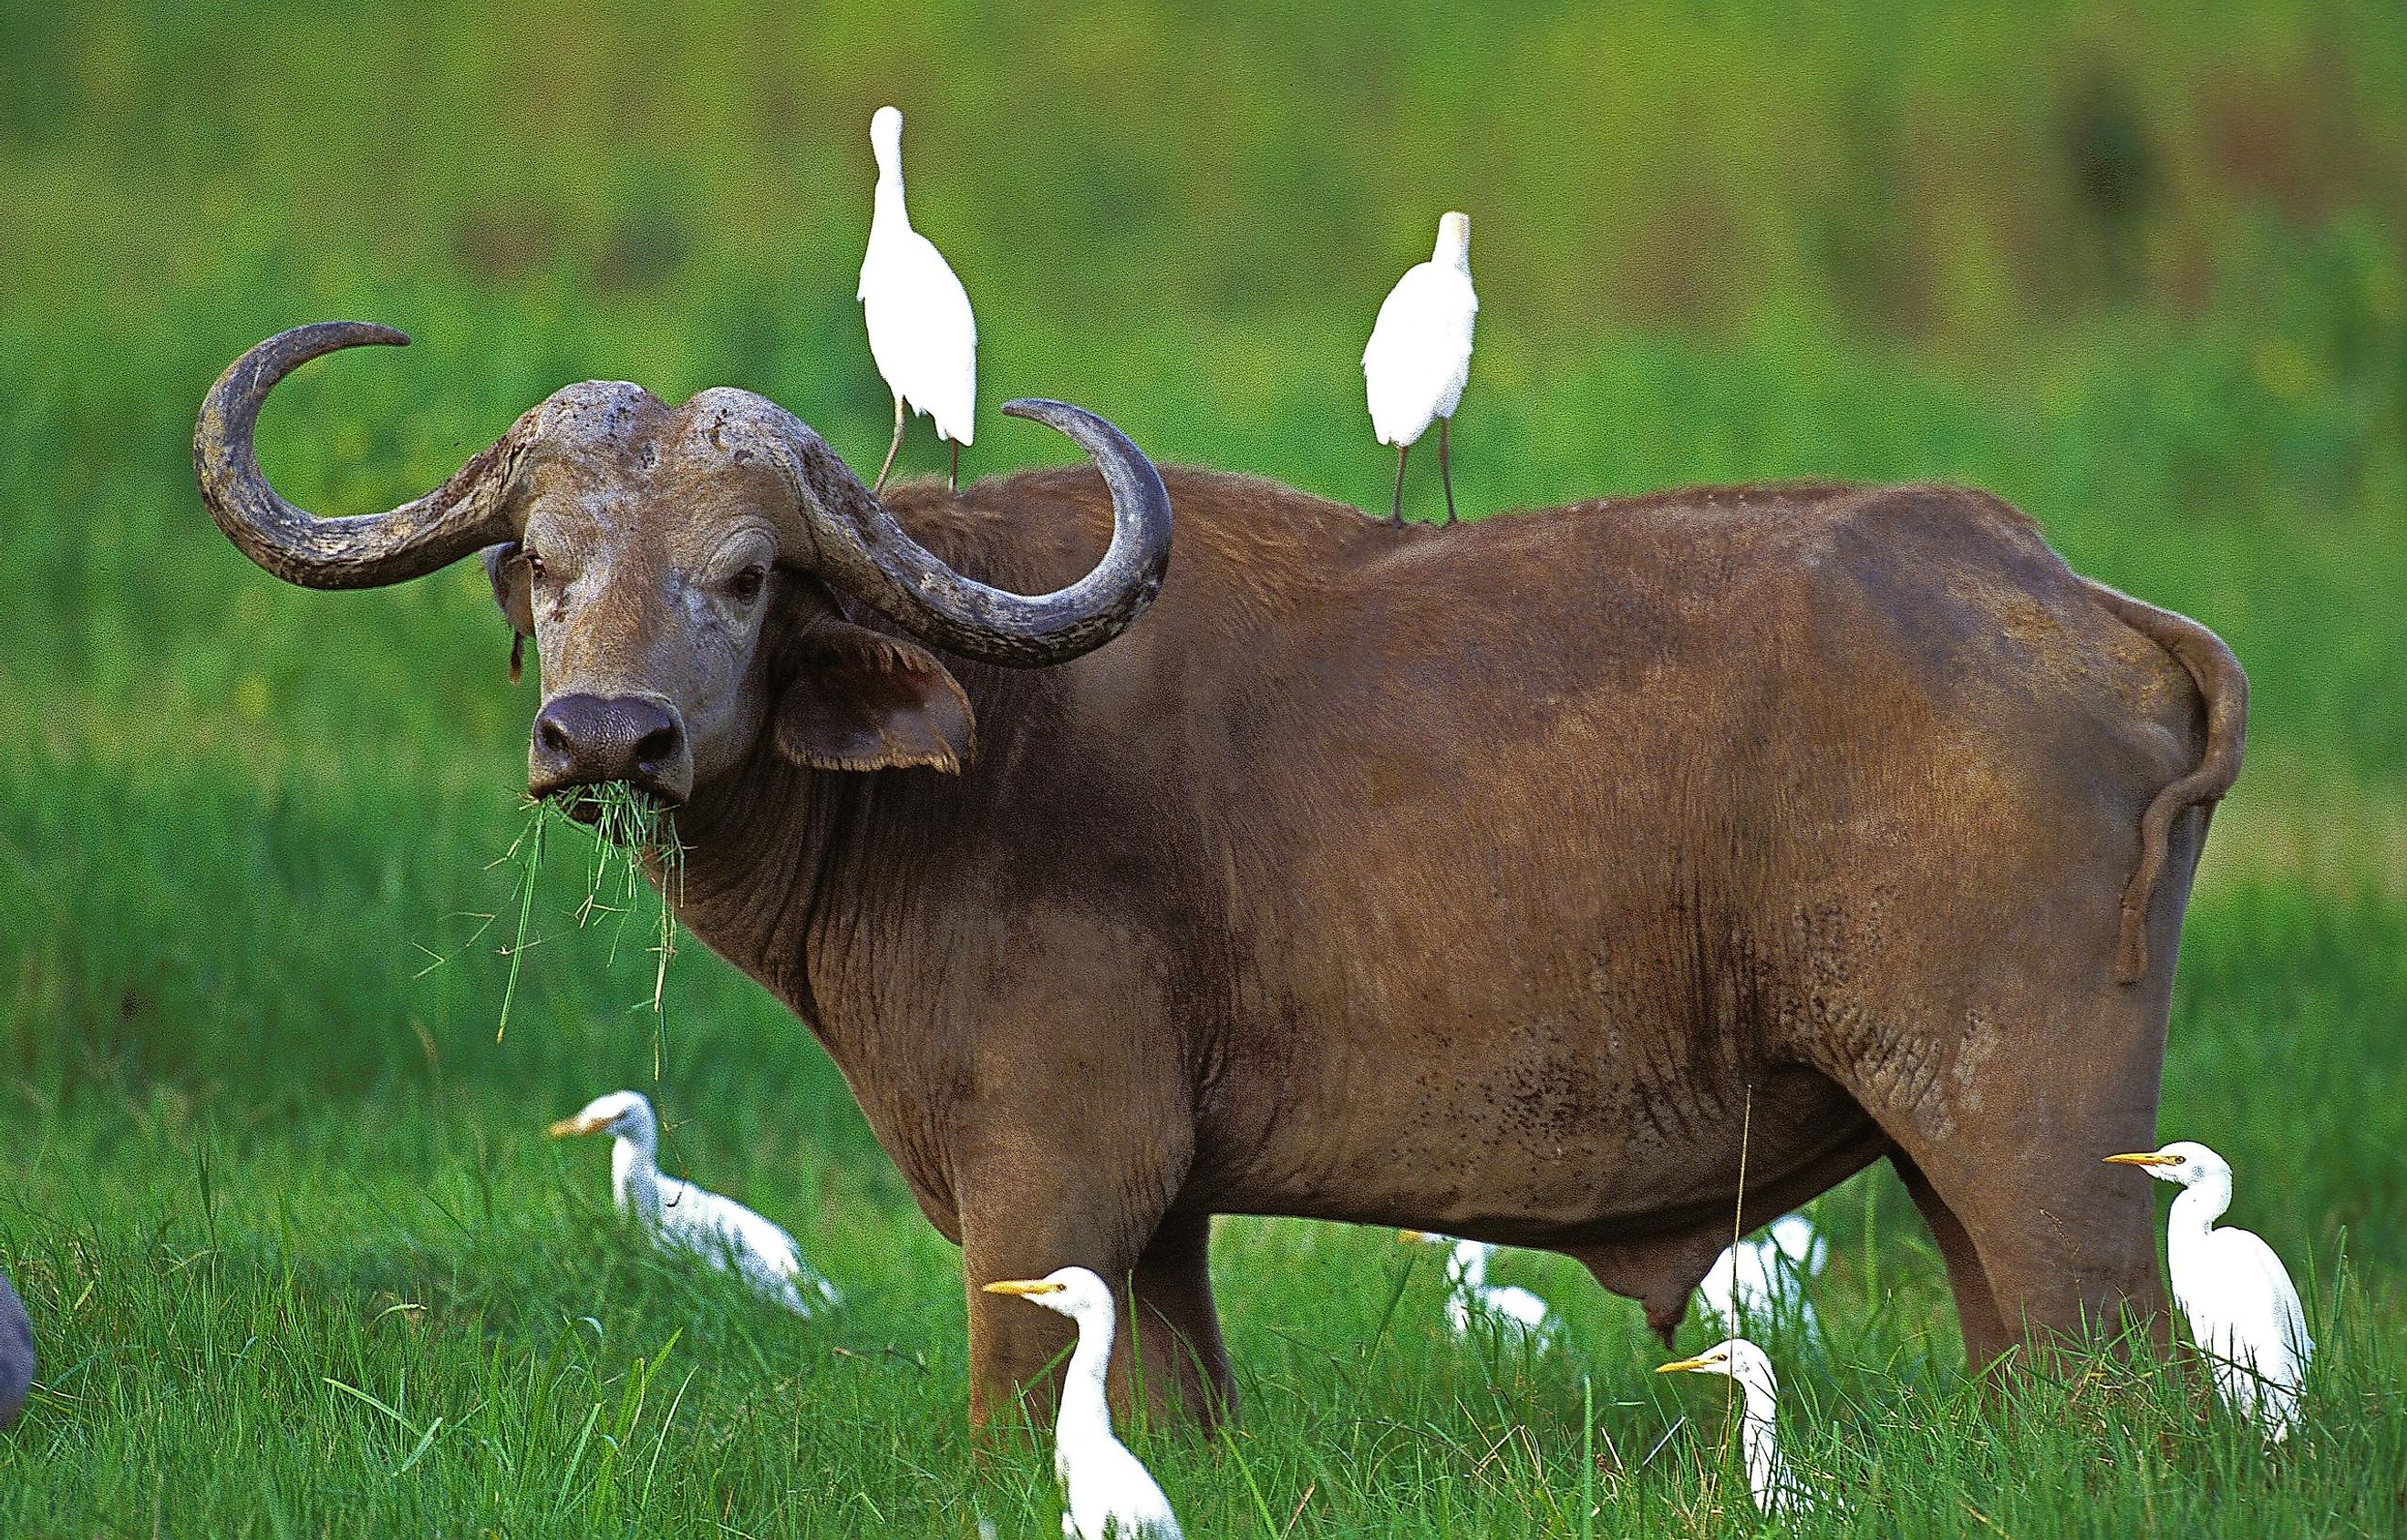 Buffalo surrounded by cattle egret - an example of commensalism.